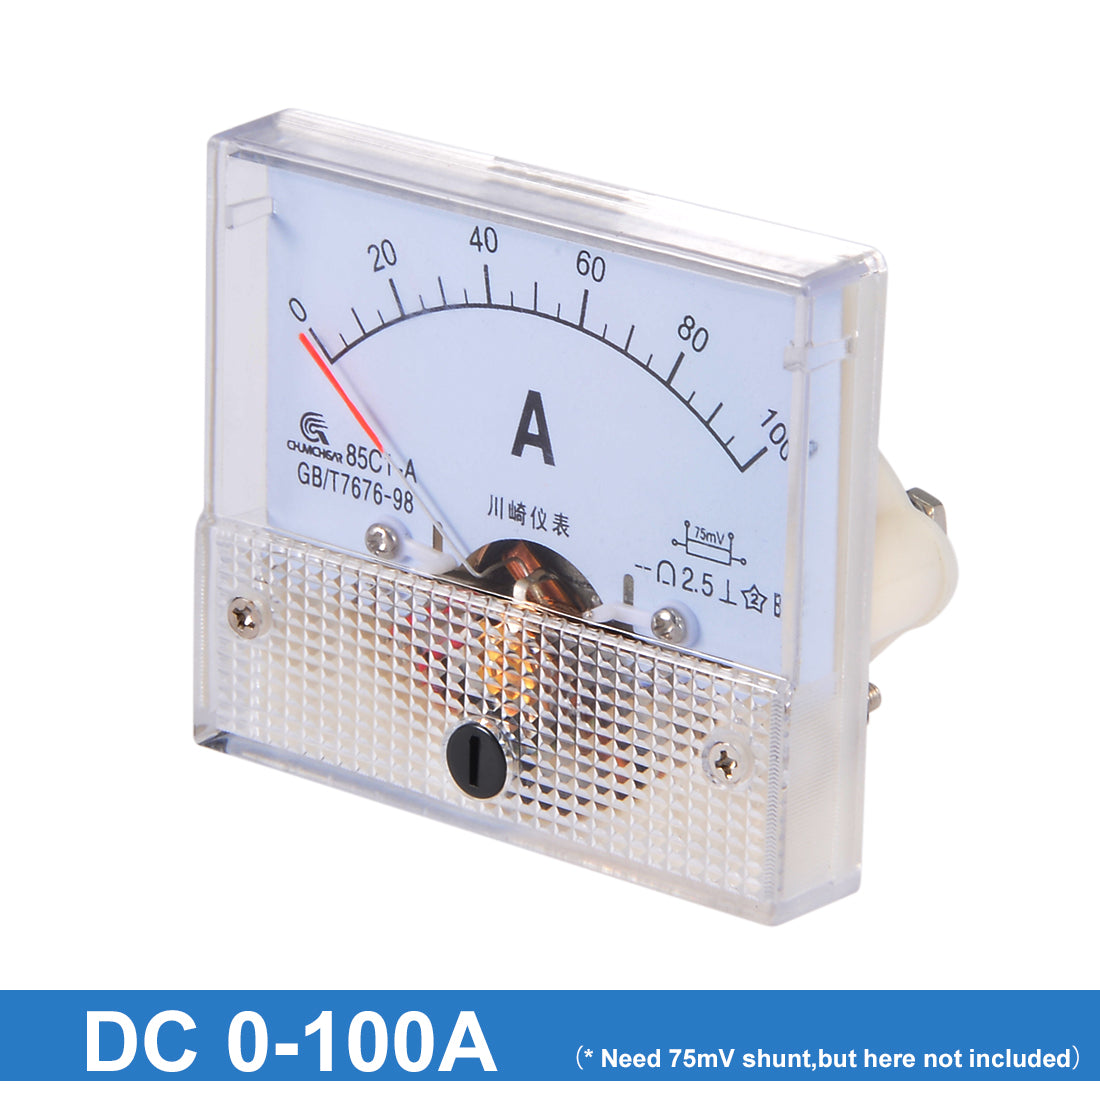 uxcell Uxcell 85C1-A Analog Current Panel Meter DC 100A Ammeter for Circuit Testing Ampere Tester Gauge 1 PCS